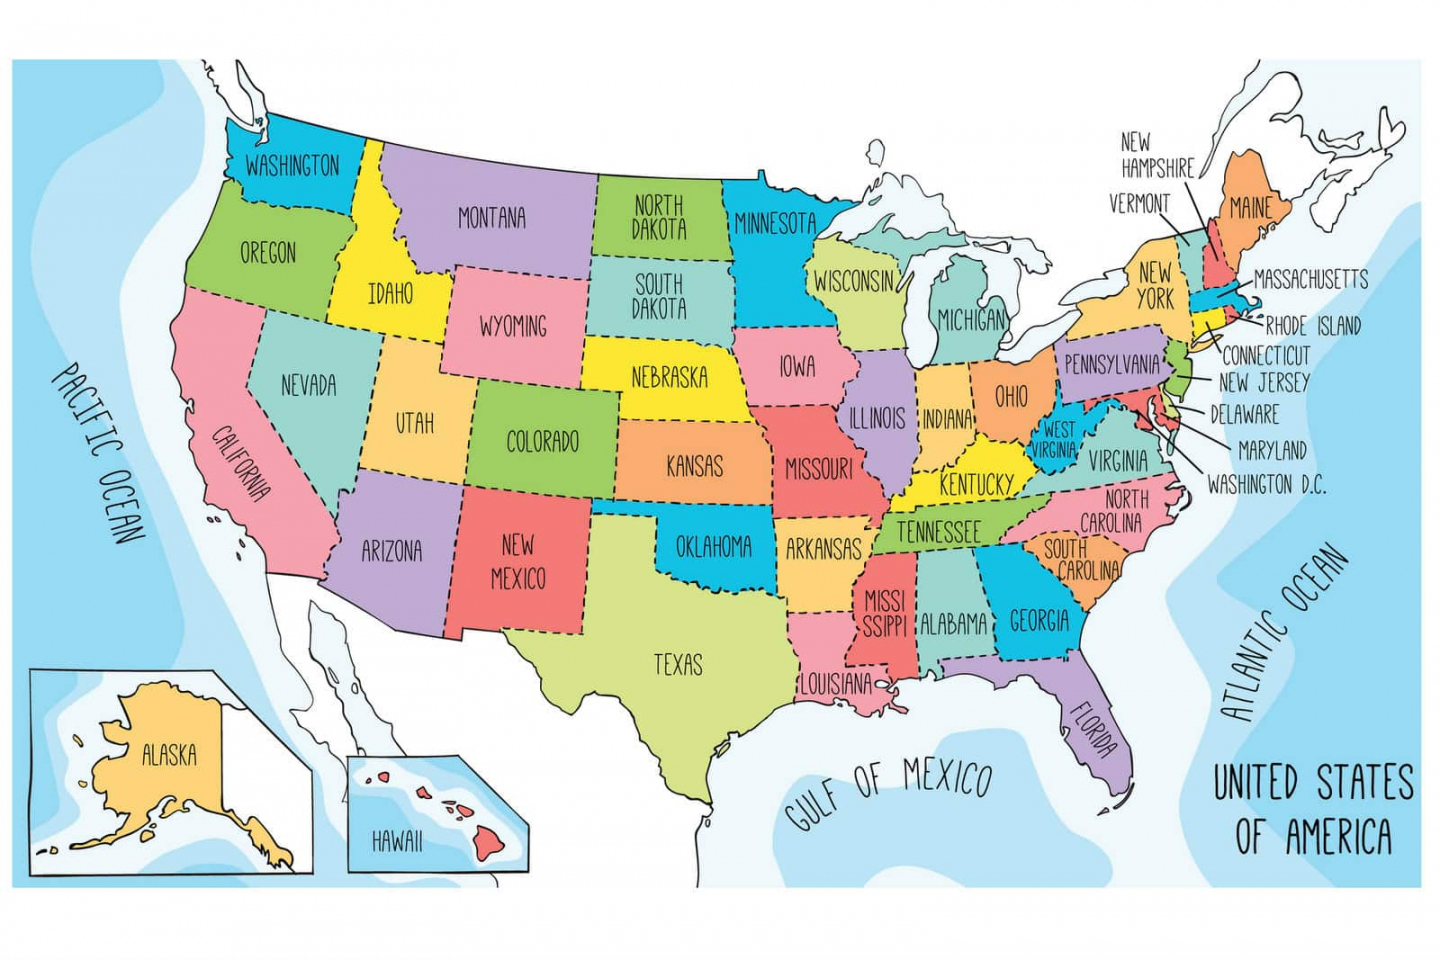 US maps to print and color - includes state names - Print Color Fun!